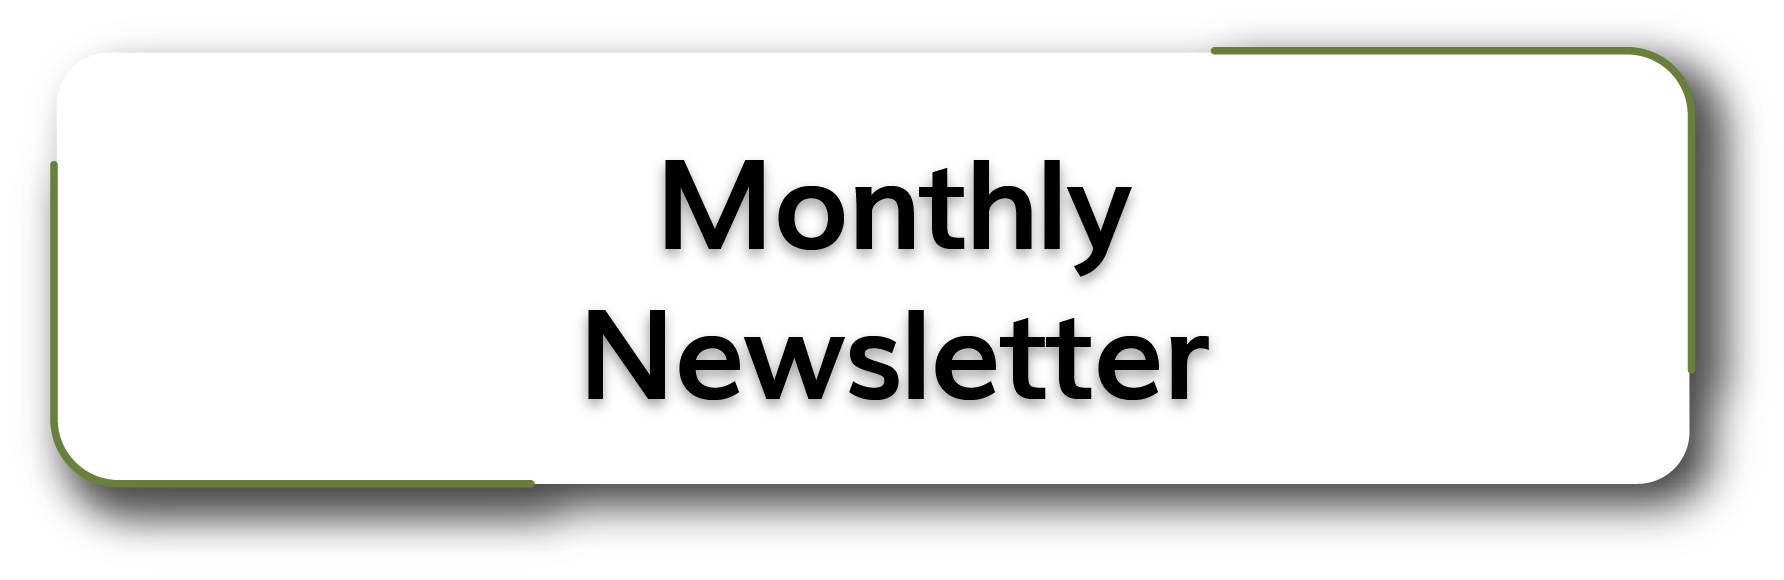 Monthly Newsletter Button